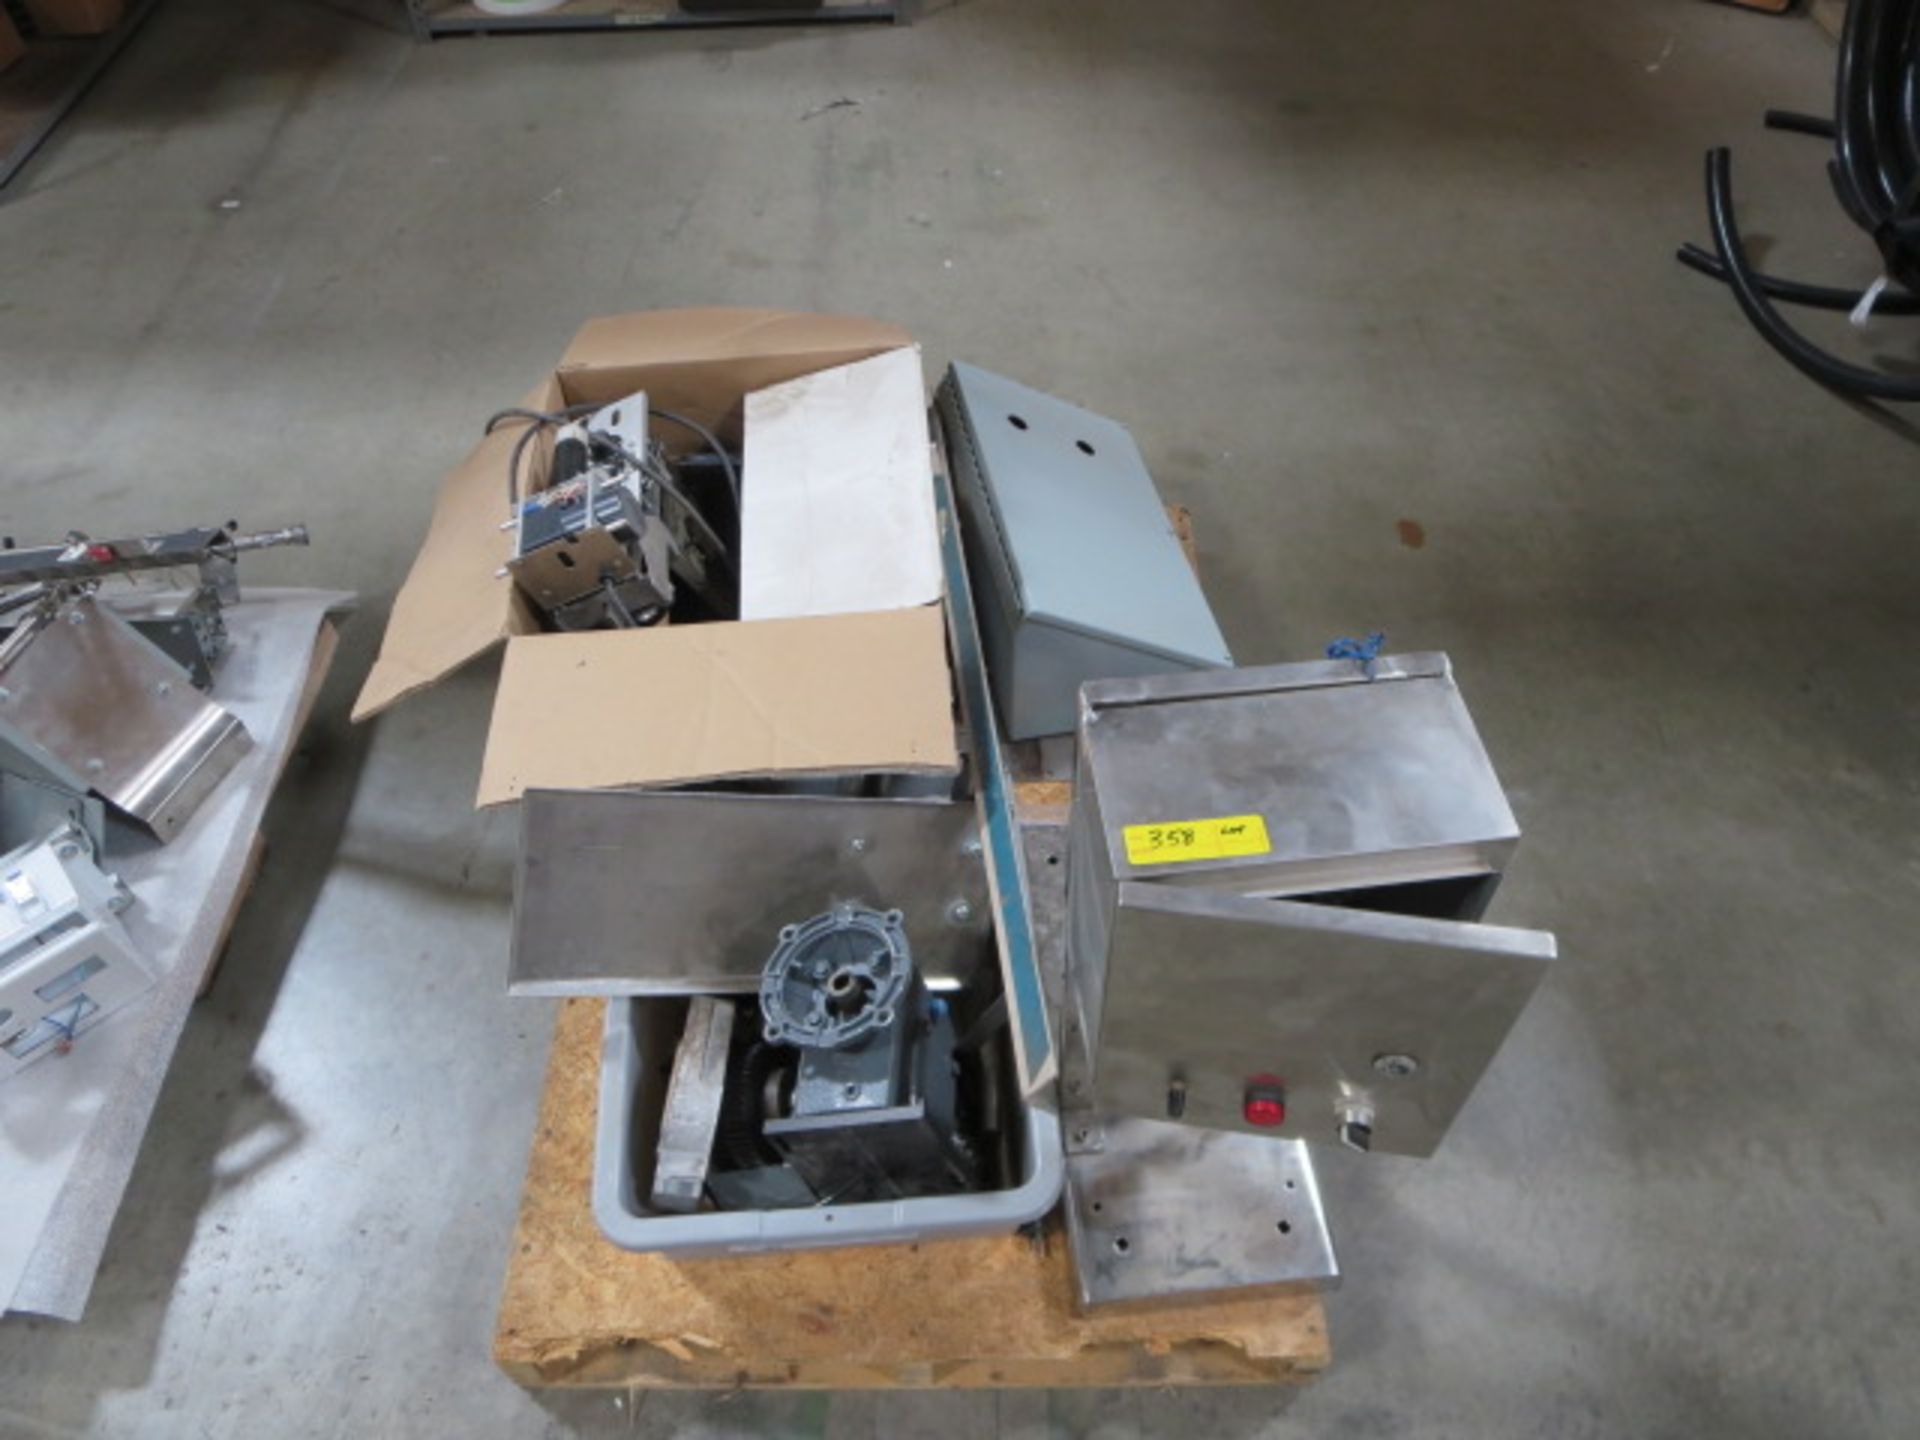 Lot of Assorted Machine Components, Approx 50pcs, Contents of 4 Pallets and 1 Cart - Image 5 of 5